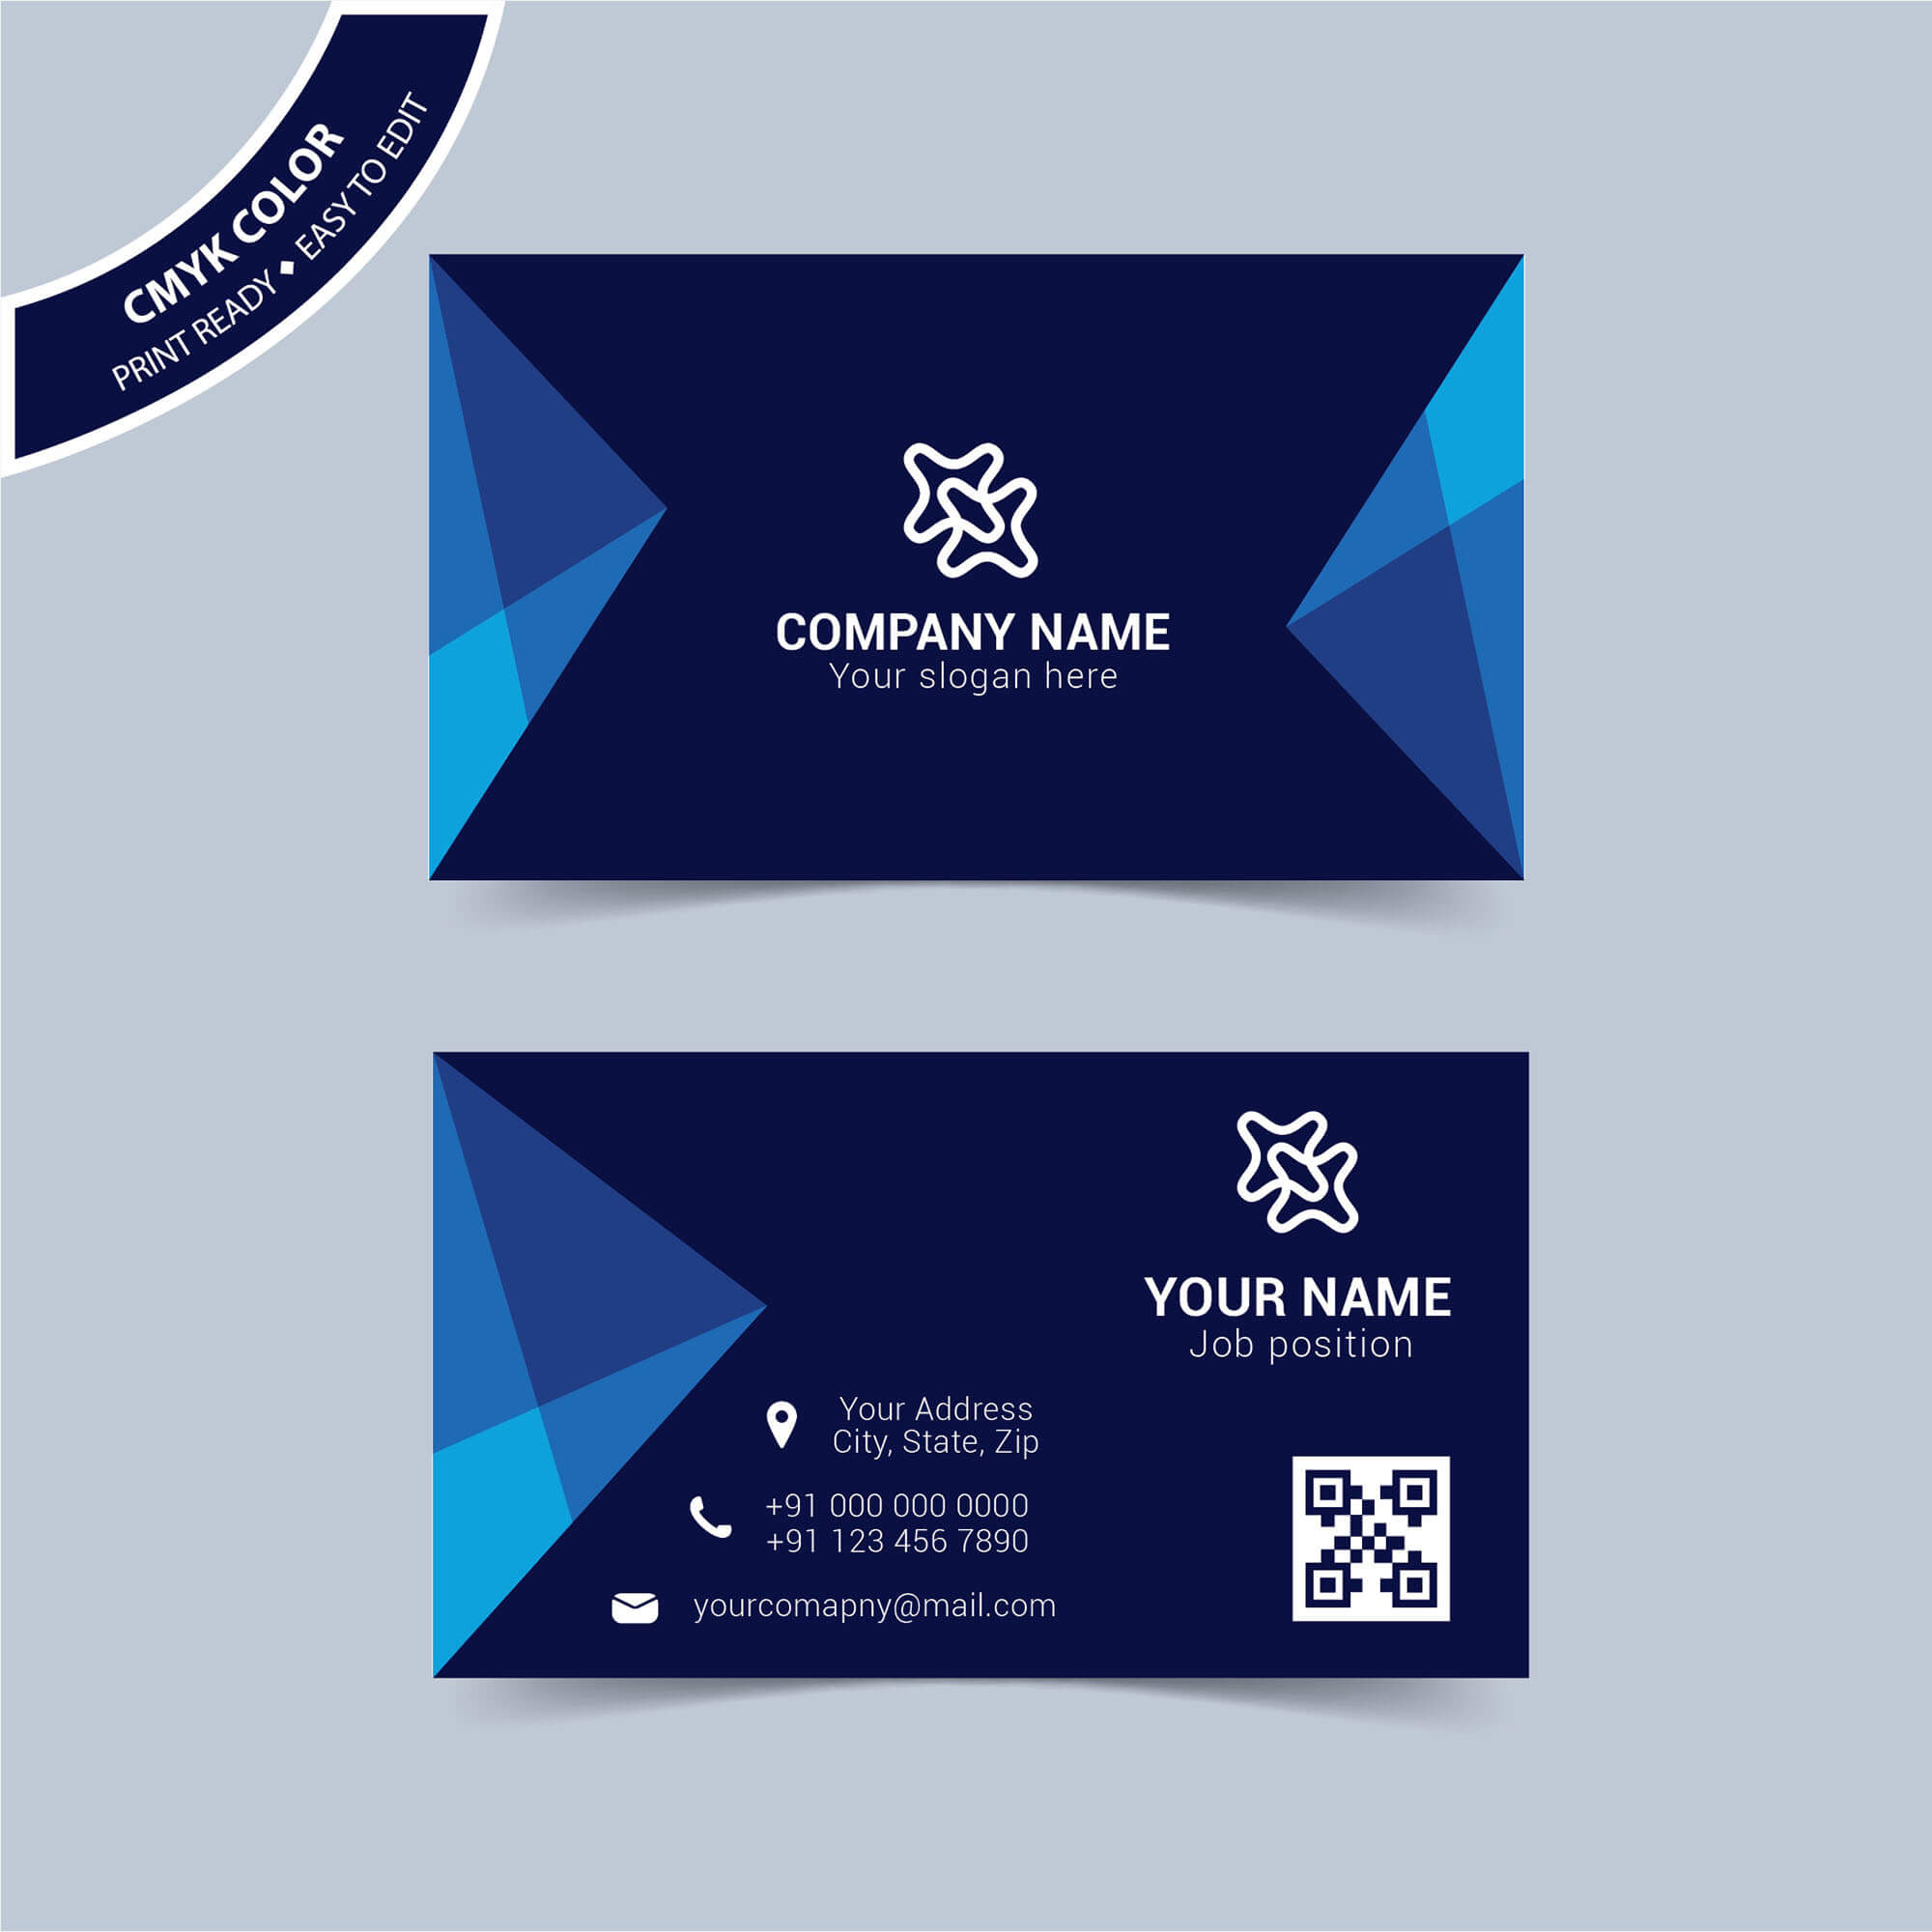 Download Template Business Card – Yatay.horizonconsulting.co With Visiting Card Illustrator Templates Download